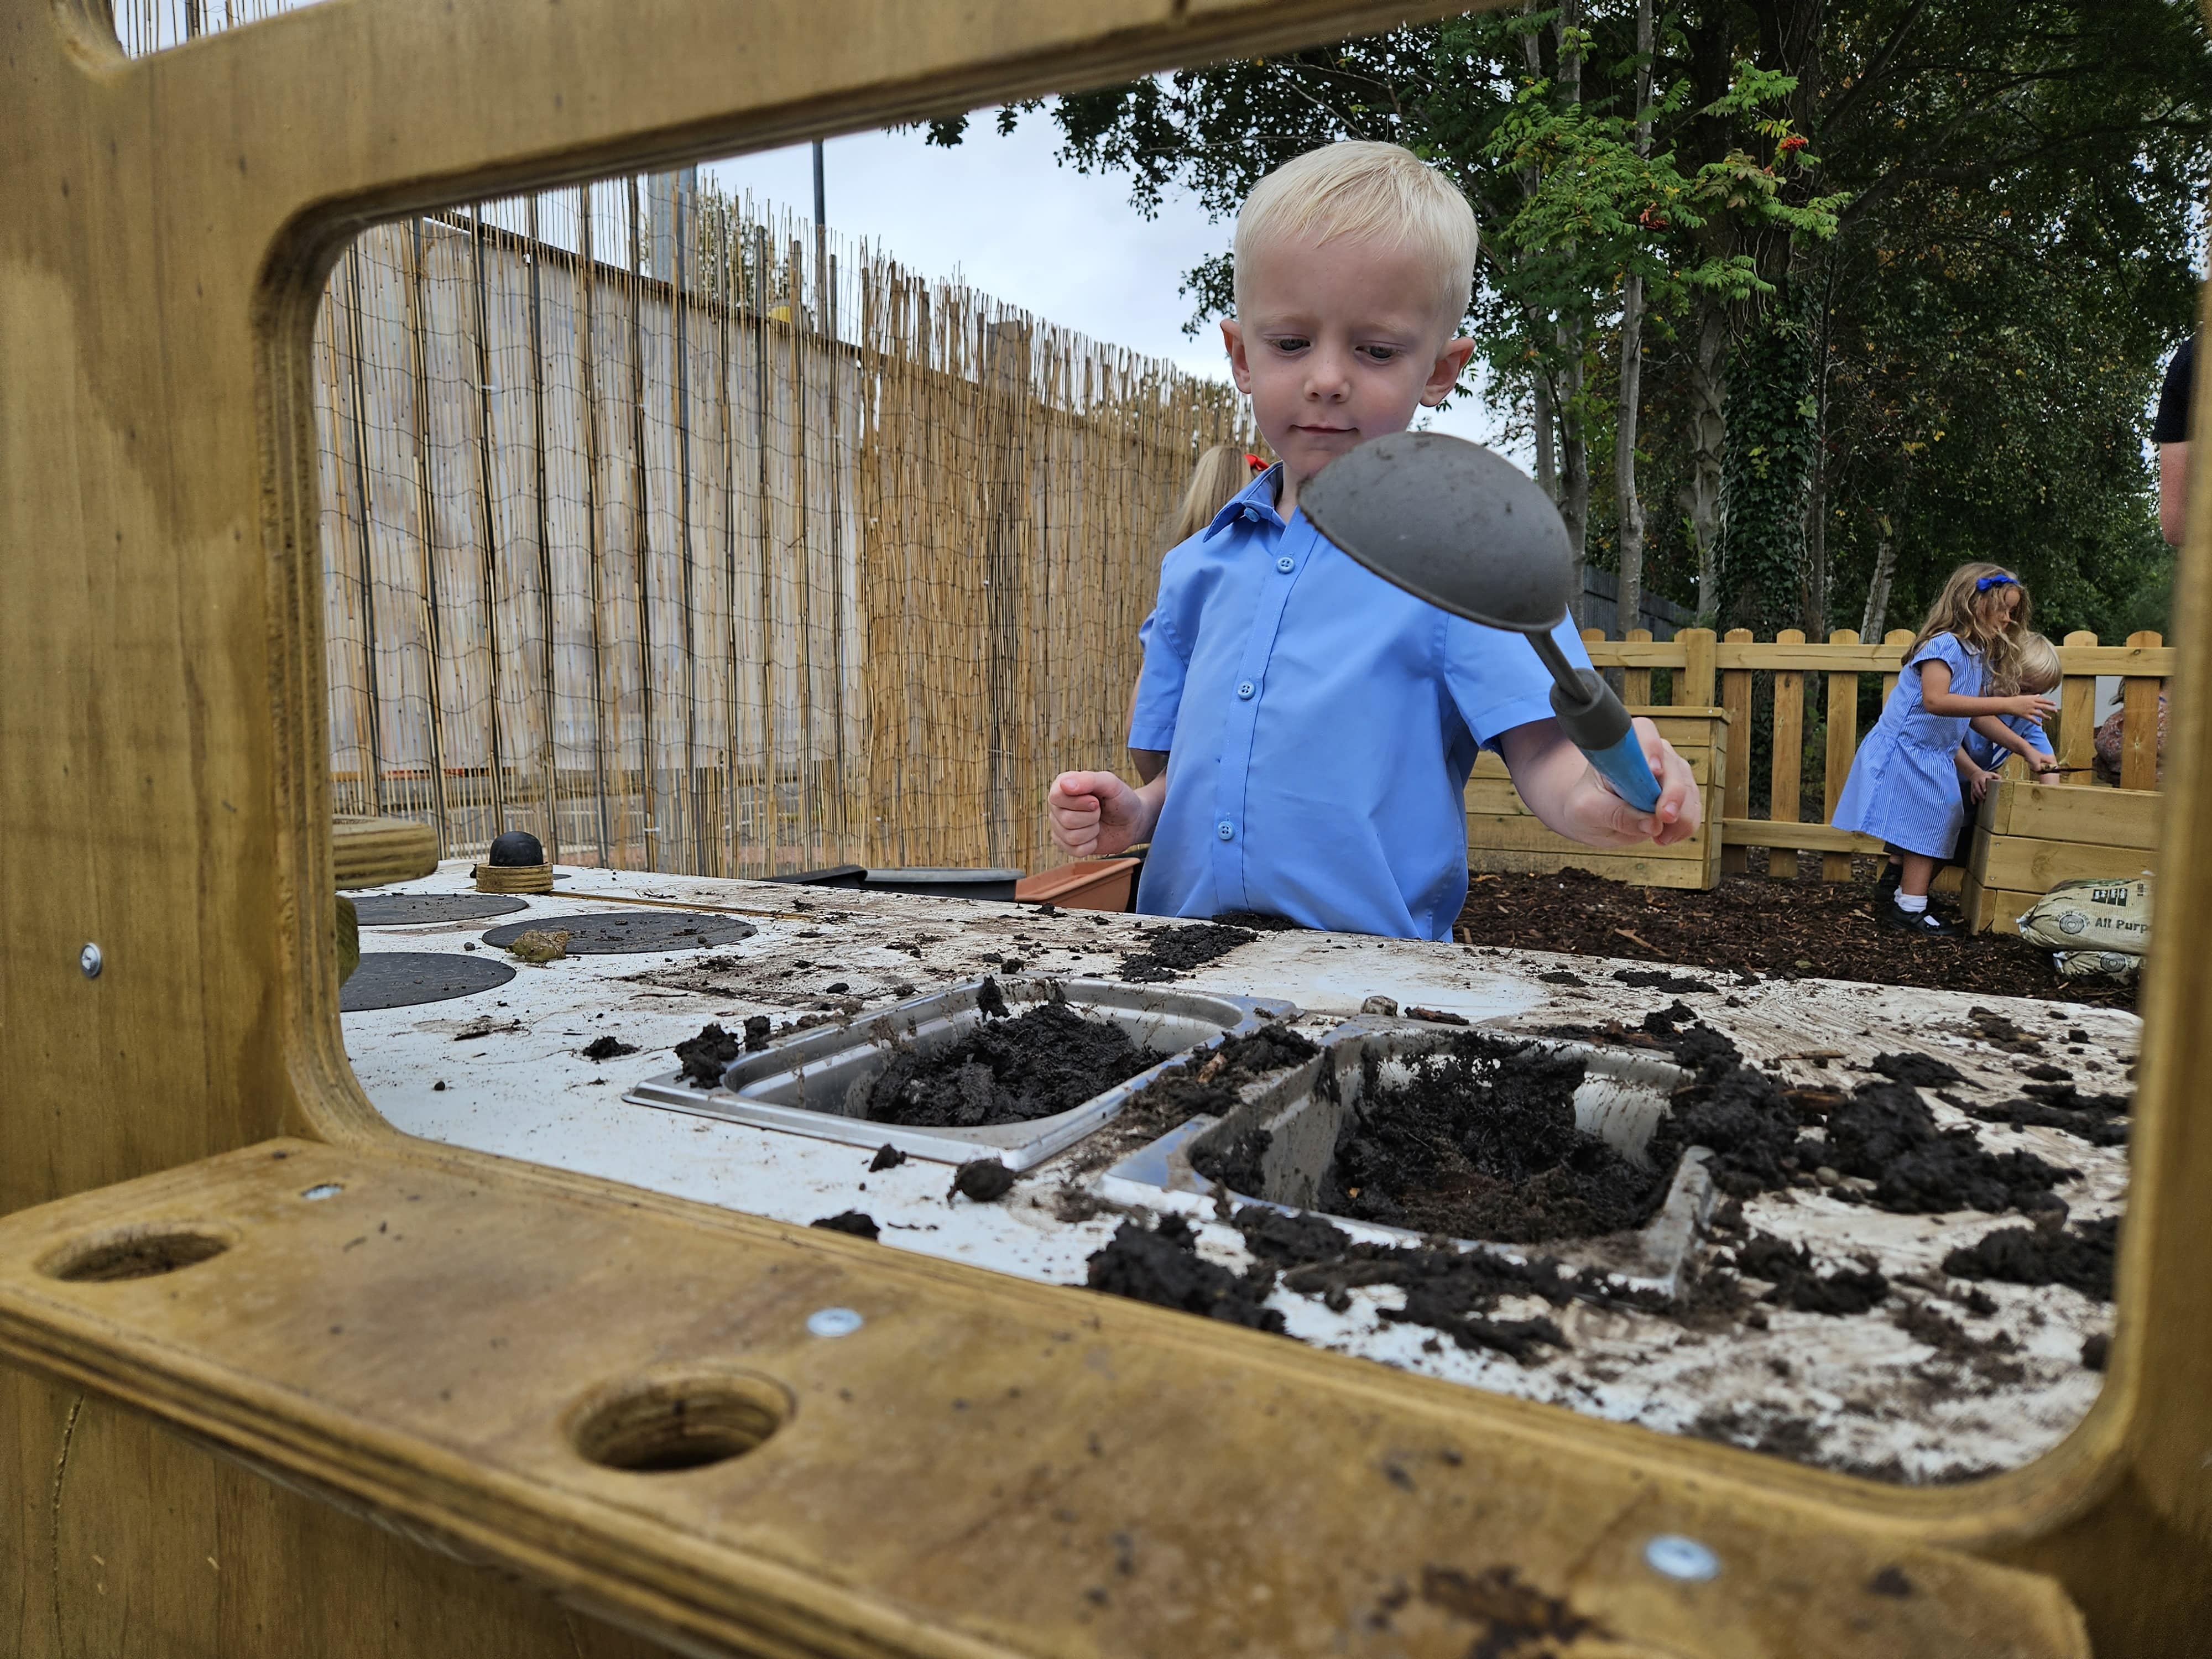 A young child playing with a mud kitchen. The young boy is using a soup spoon as they scoop mud in and out of the containers,